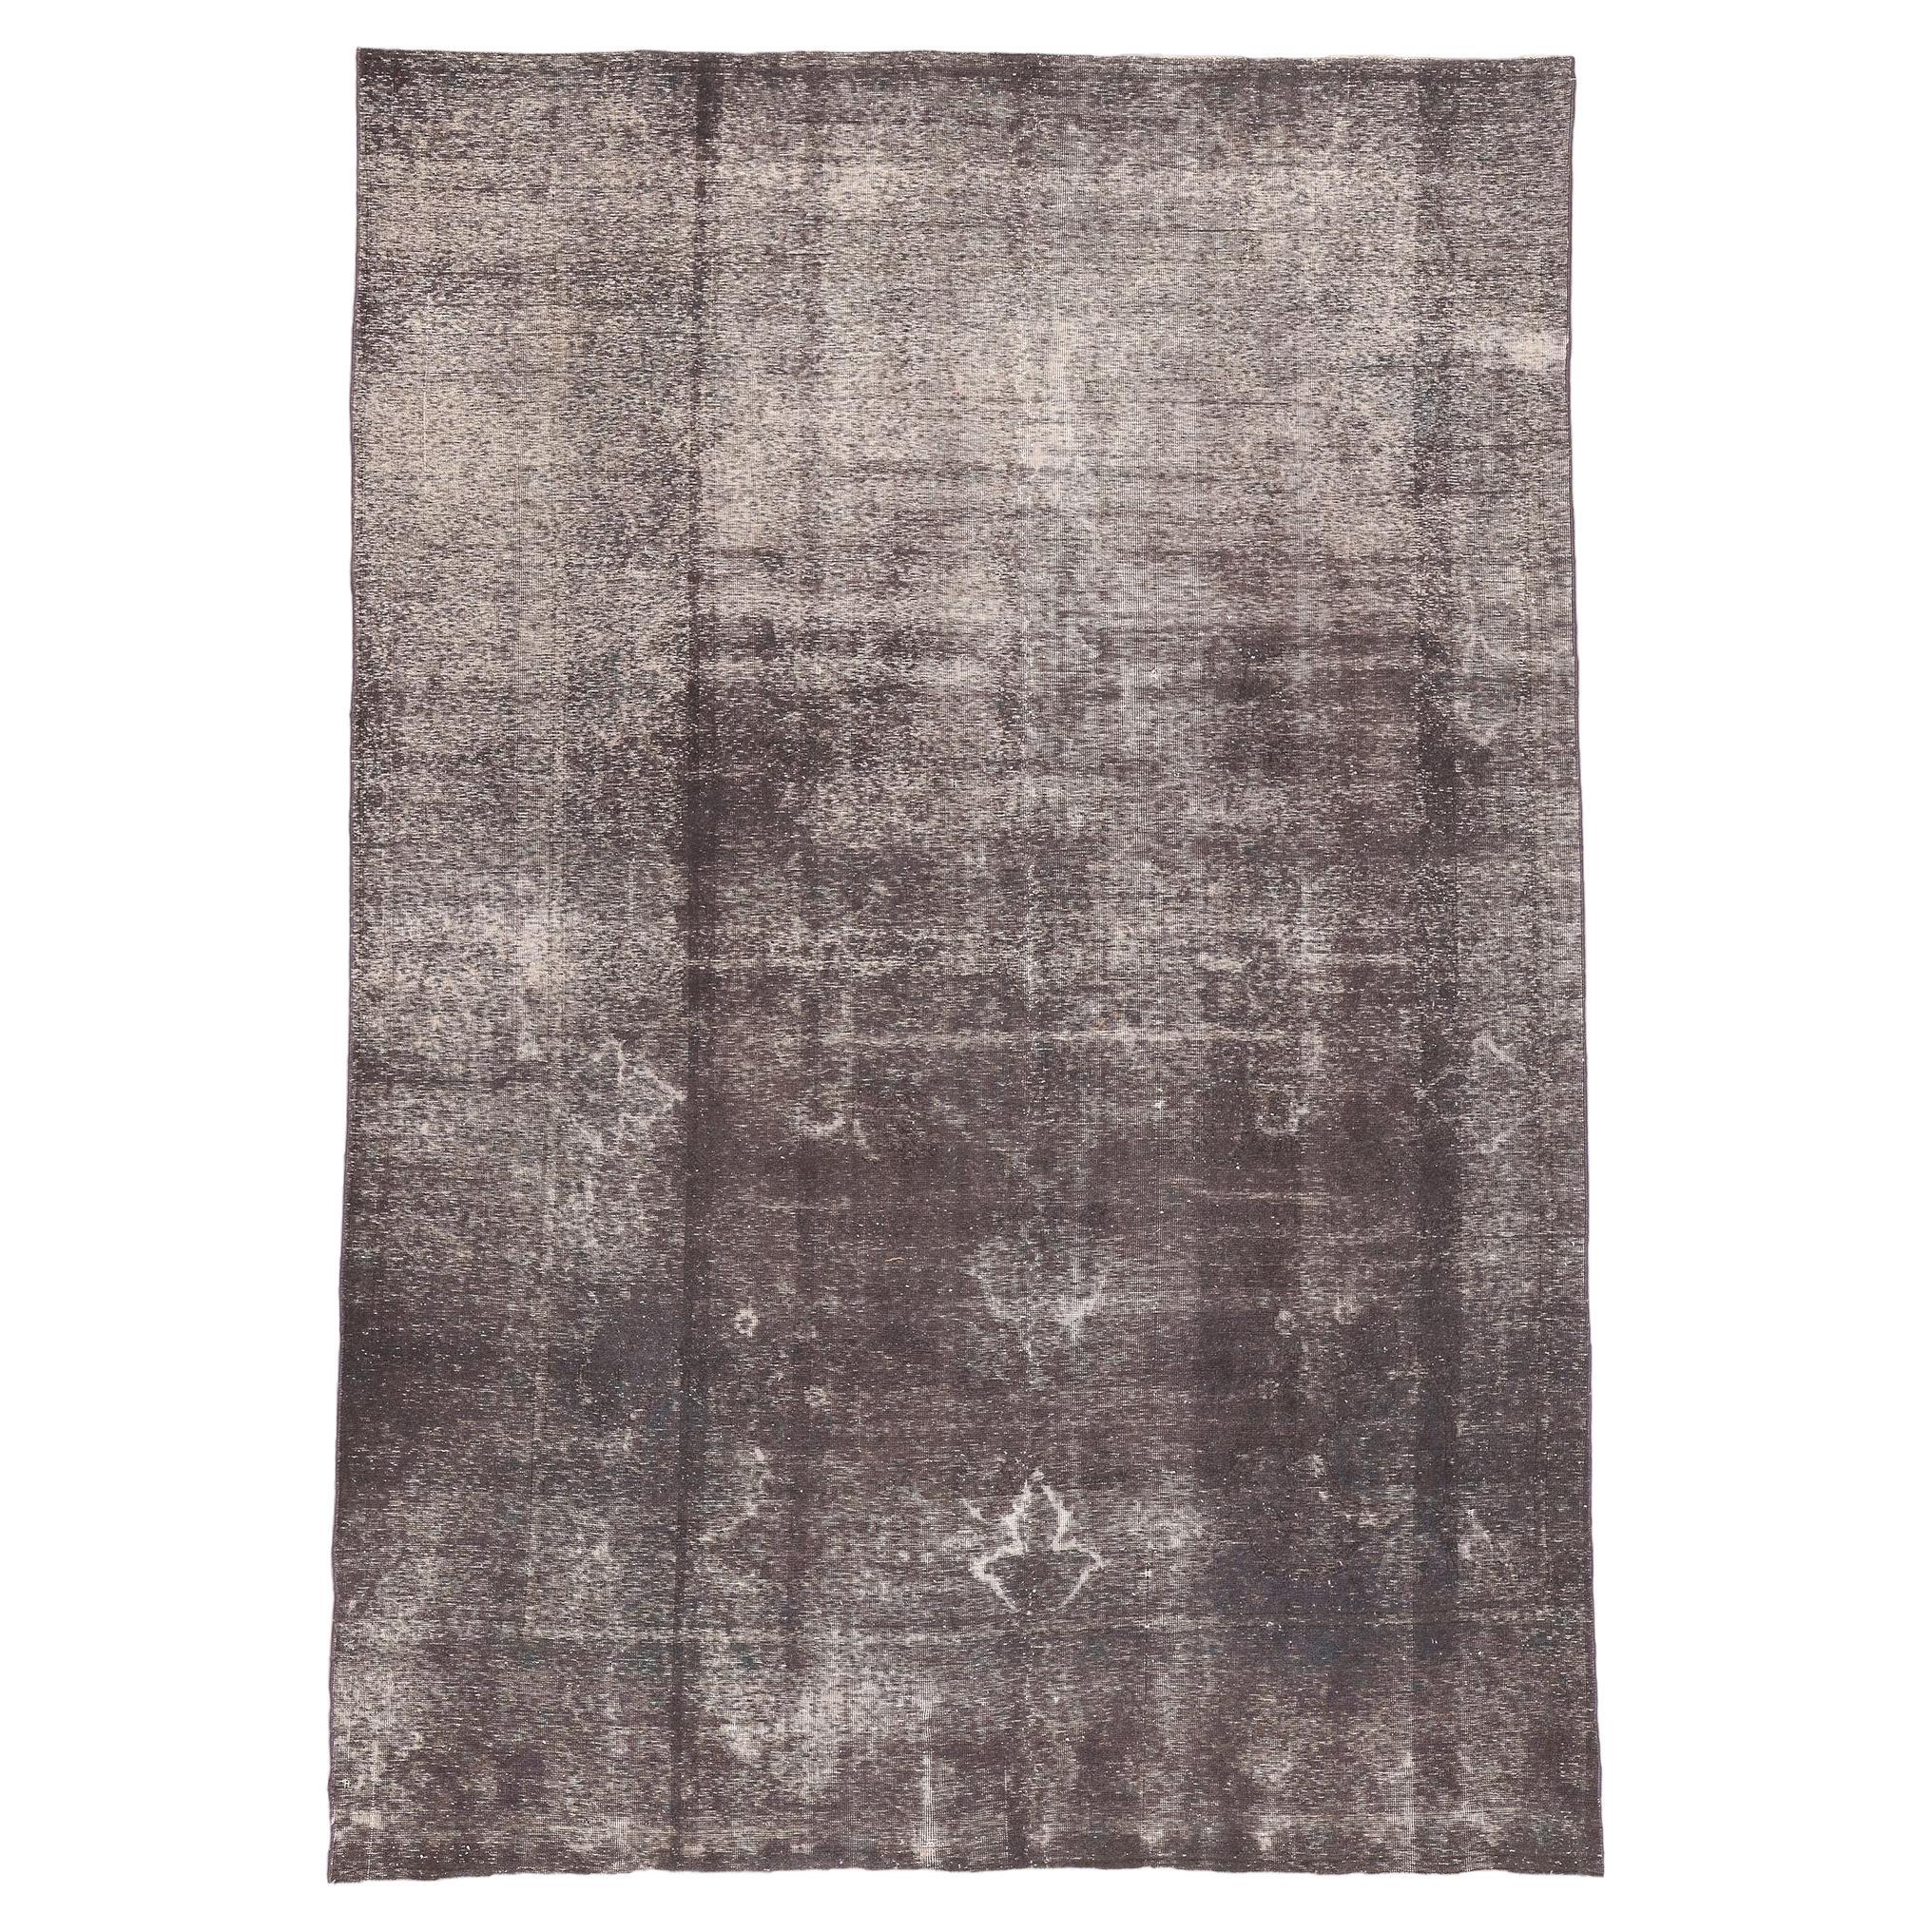 Vintage Turkish Overdyed Rug, Modern Industrial Meets Raw & Refined Bauhaus For Sale